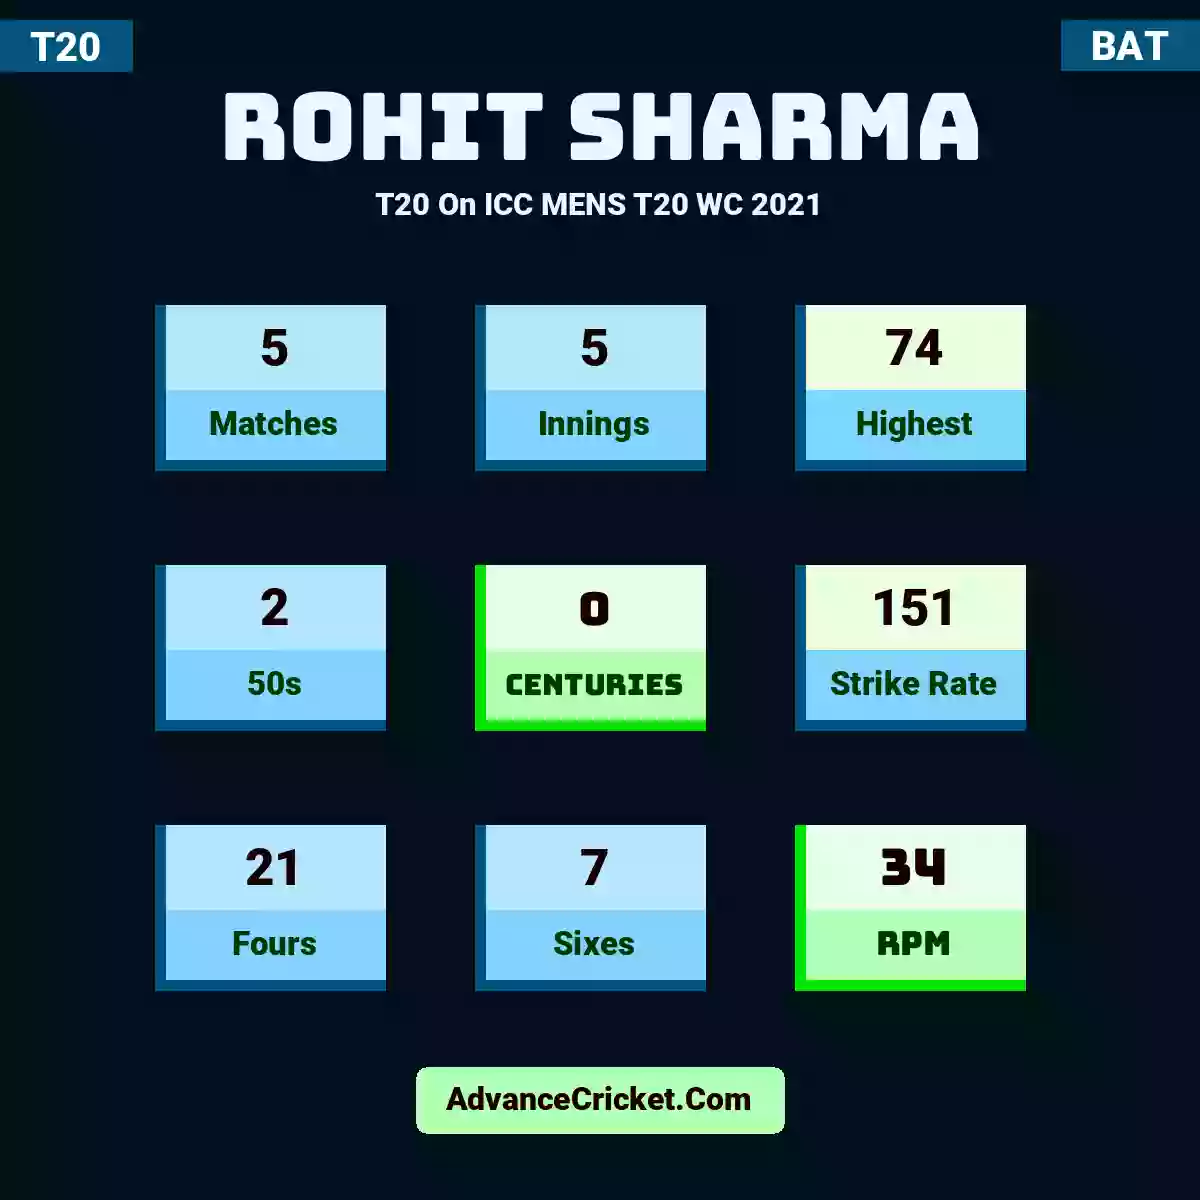 Rohit Sharma T20  On ICC MENS T20 WC 2021, Rohit Sharma played 5 matches, scored 74 runs as highest, 2 half-centuries, and 0 centuries, with a strike rate of 151. R.Sharma hit 21 fours and 7 sixes, with an RPM of 34.